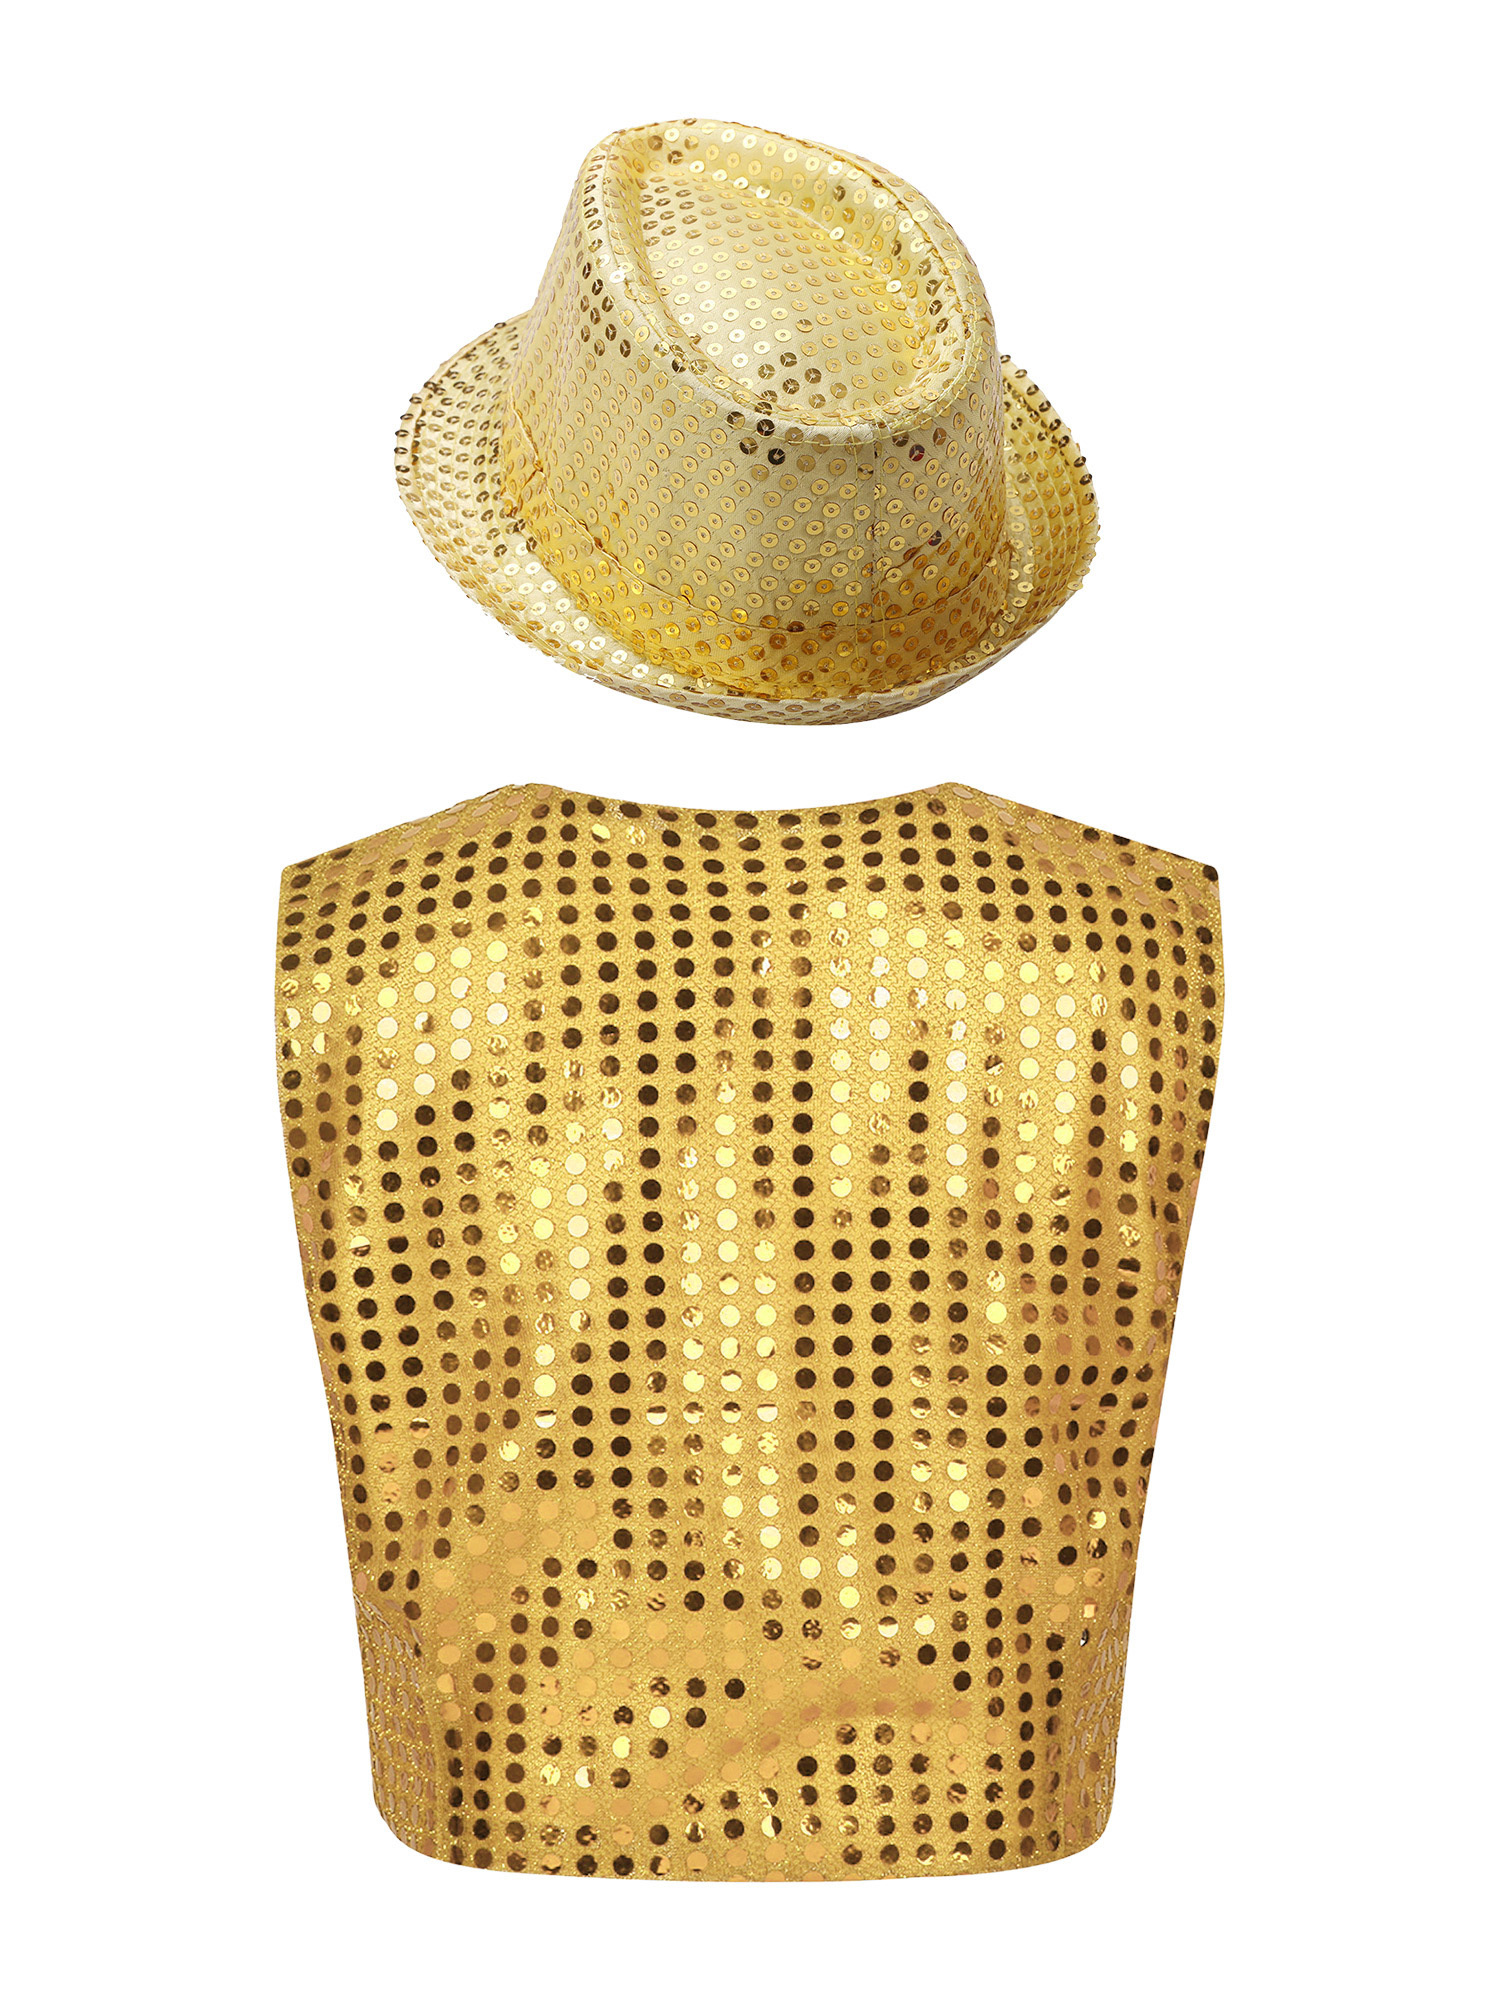 IEFIEL Kids Boys Sparkle Sequins Button Down Vest with Hat Dance Outfit Set Hip Hop Jazz Stage Performance Costume Gold 11-12 - image 2 of 7